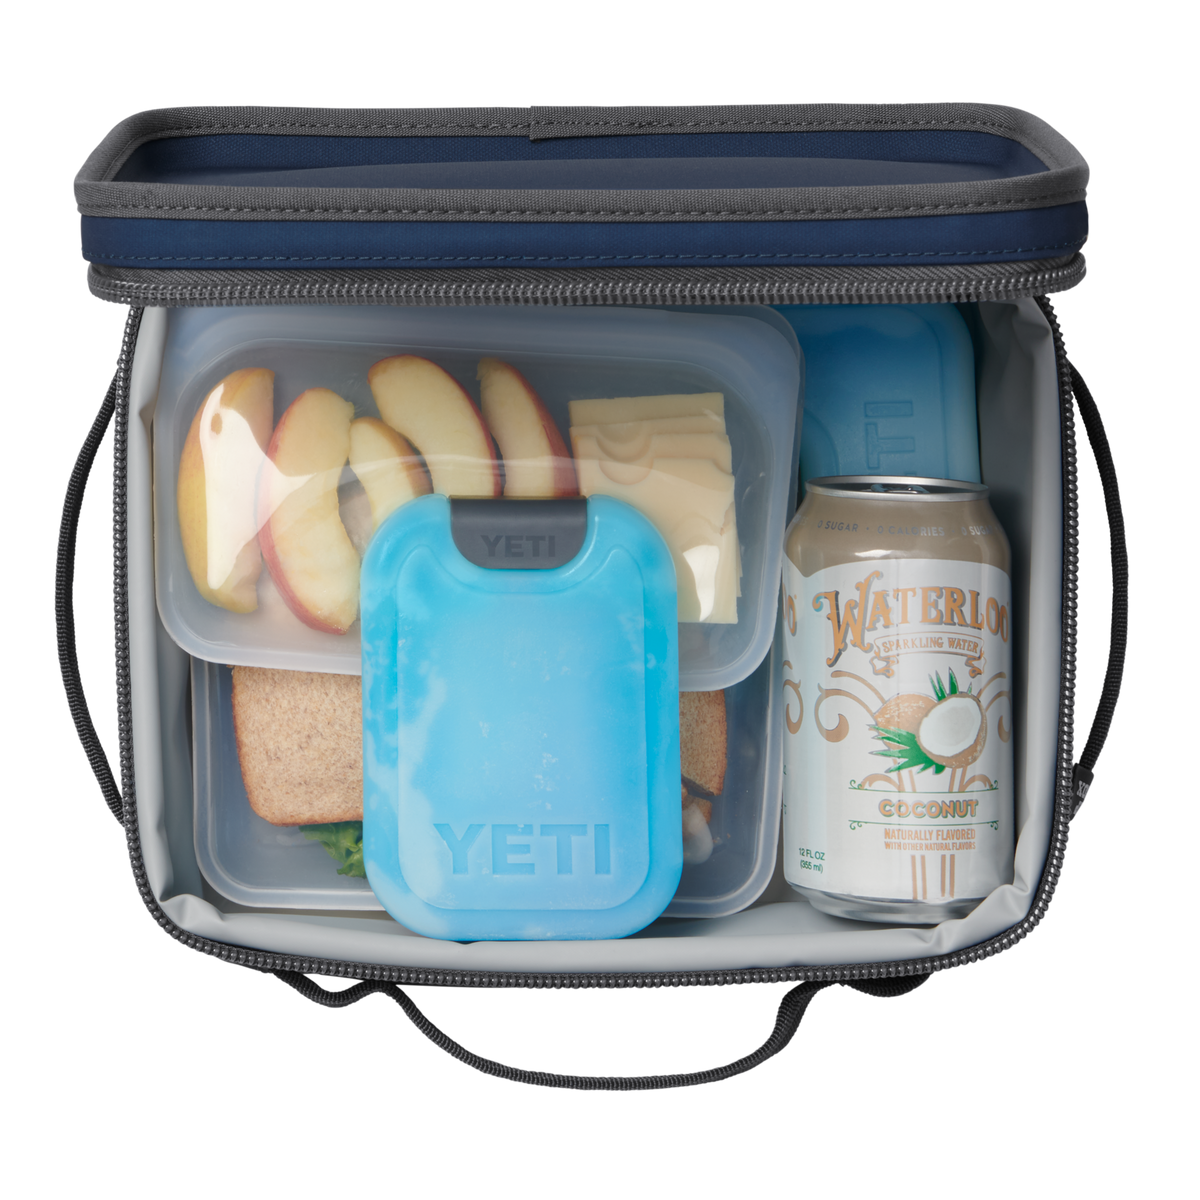 Replying to @user9440984401289 they do! Check out the daytrip lunch bo, Lunch  Bag